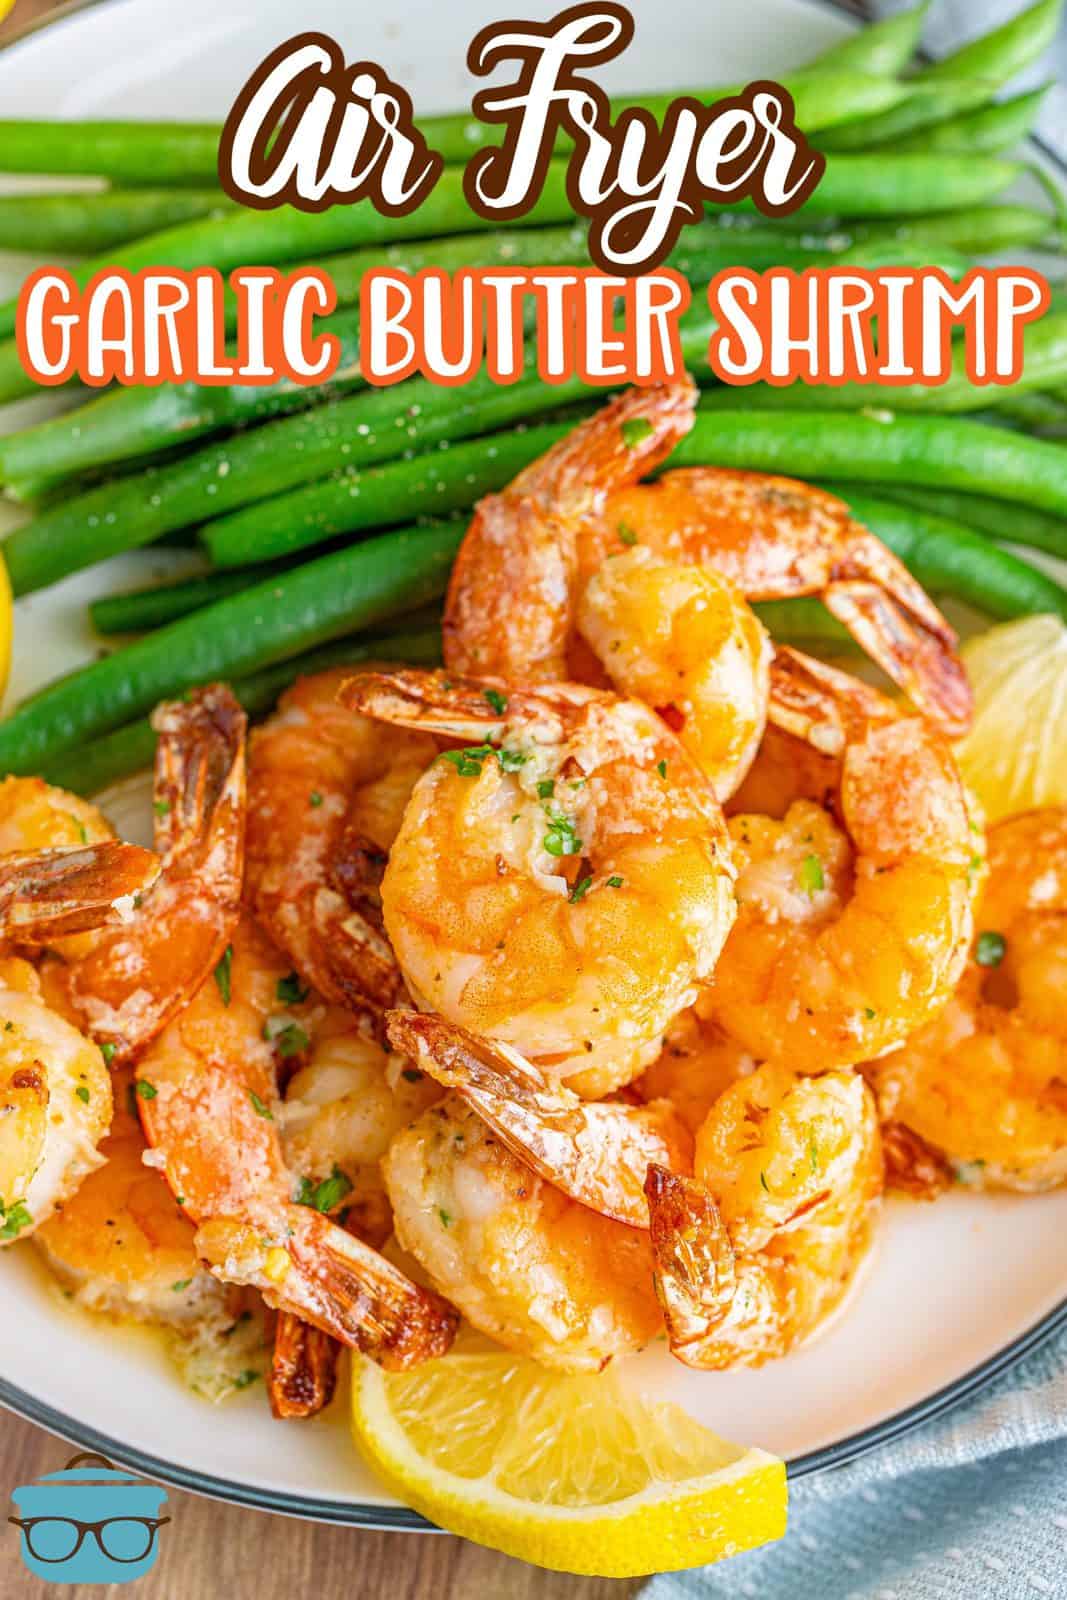 Pinterest image of Air Fryer Garlic Butter Shrimp on plate with green beans and lemon slices.